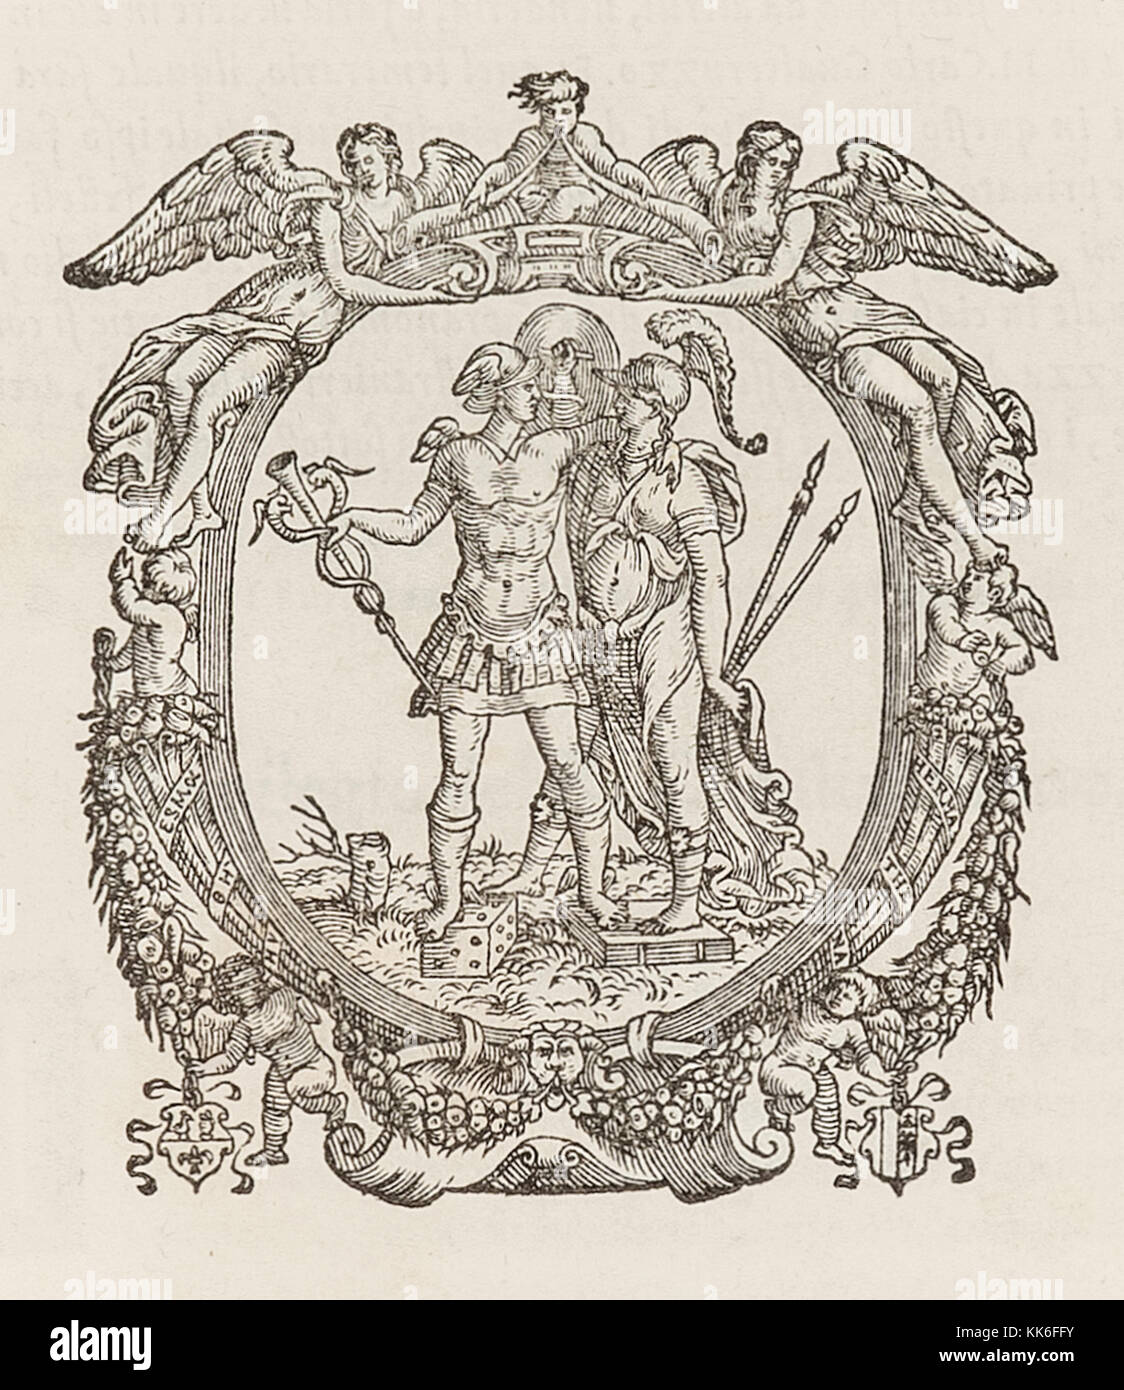 Printer’s device used by Gualtiro Scotto printers in Venice between 1550 to 1555. Hermes is shown holding the caduceus and stood on a die surrounded in an ornate frame of fruit, cherubs and angels. See more information below. Stock Photo